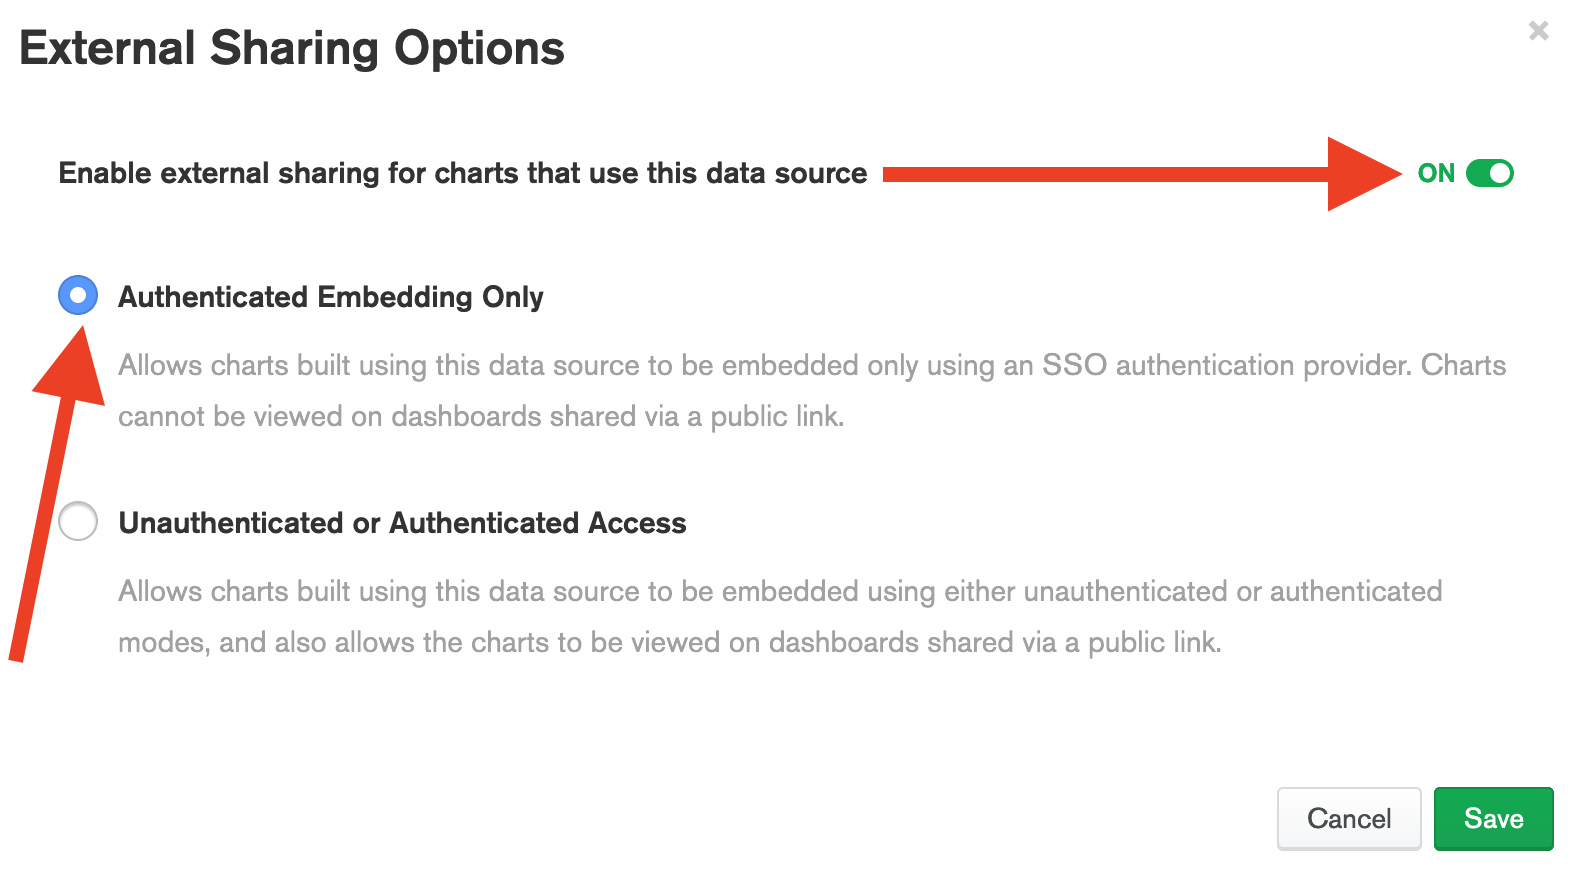 Enable external sharing and Save with "Authentical Enbedding Only" mode